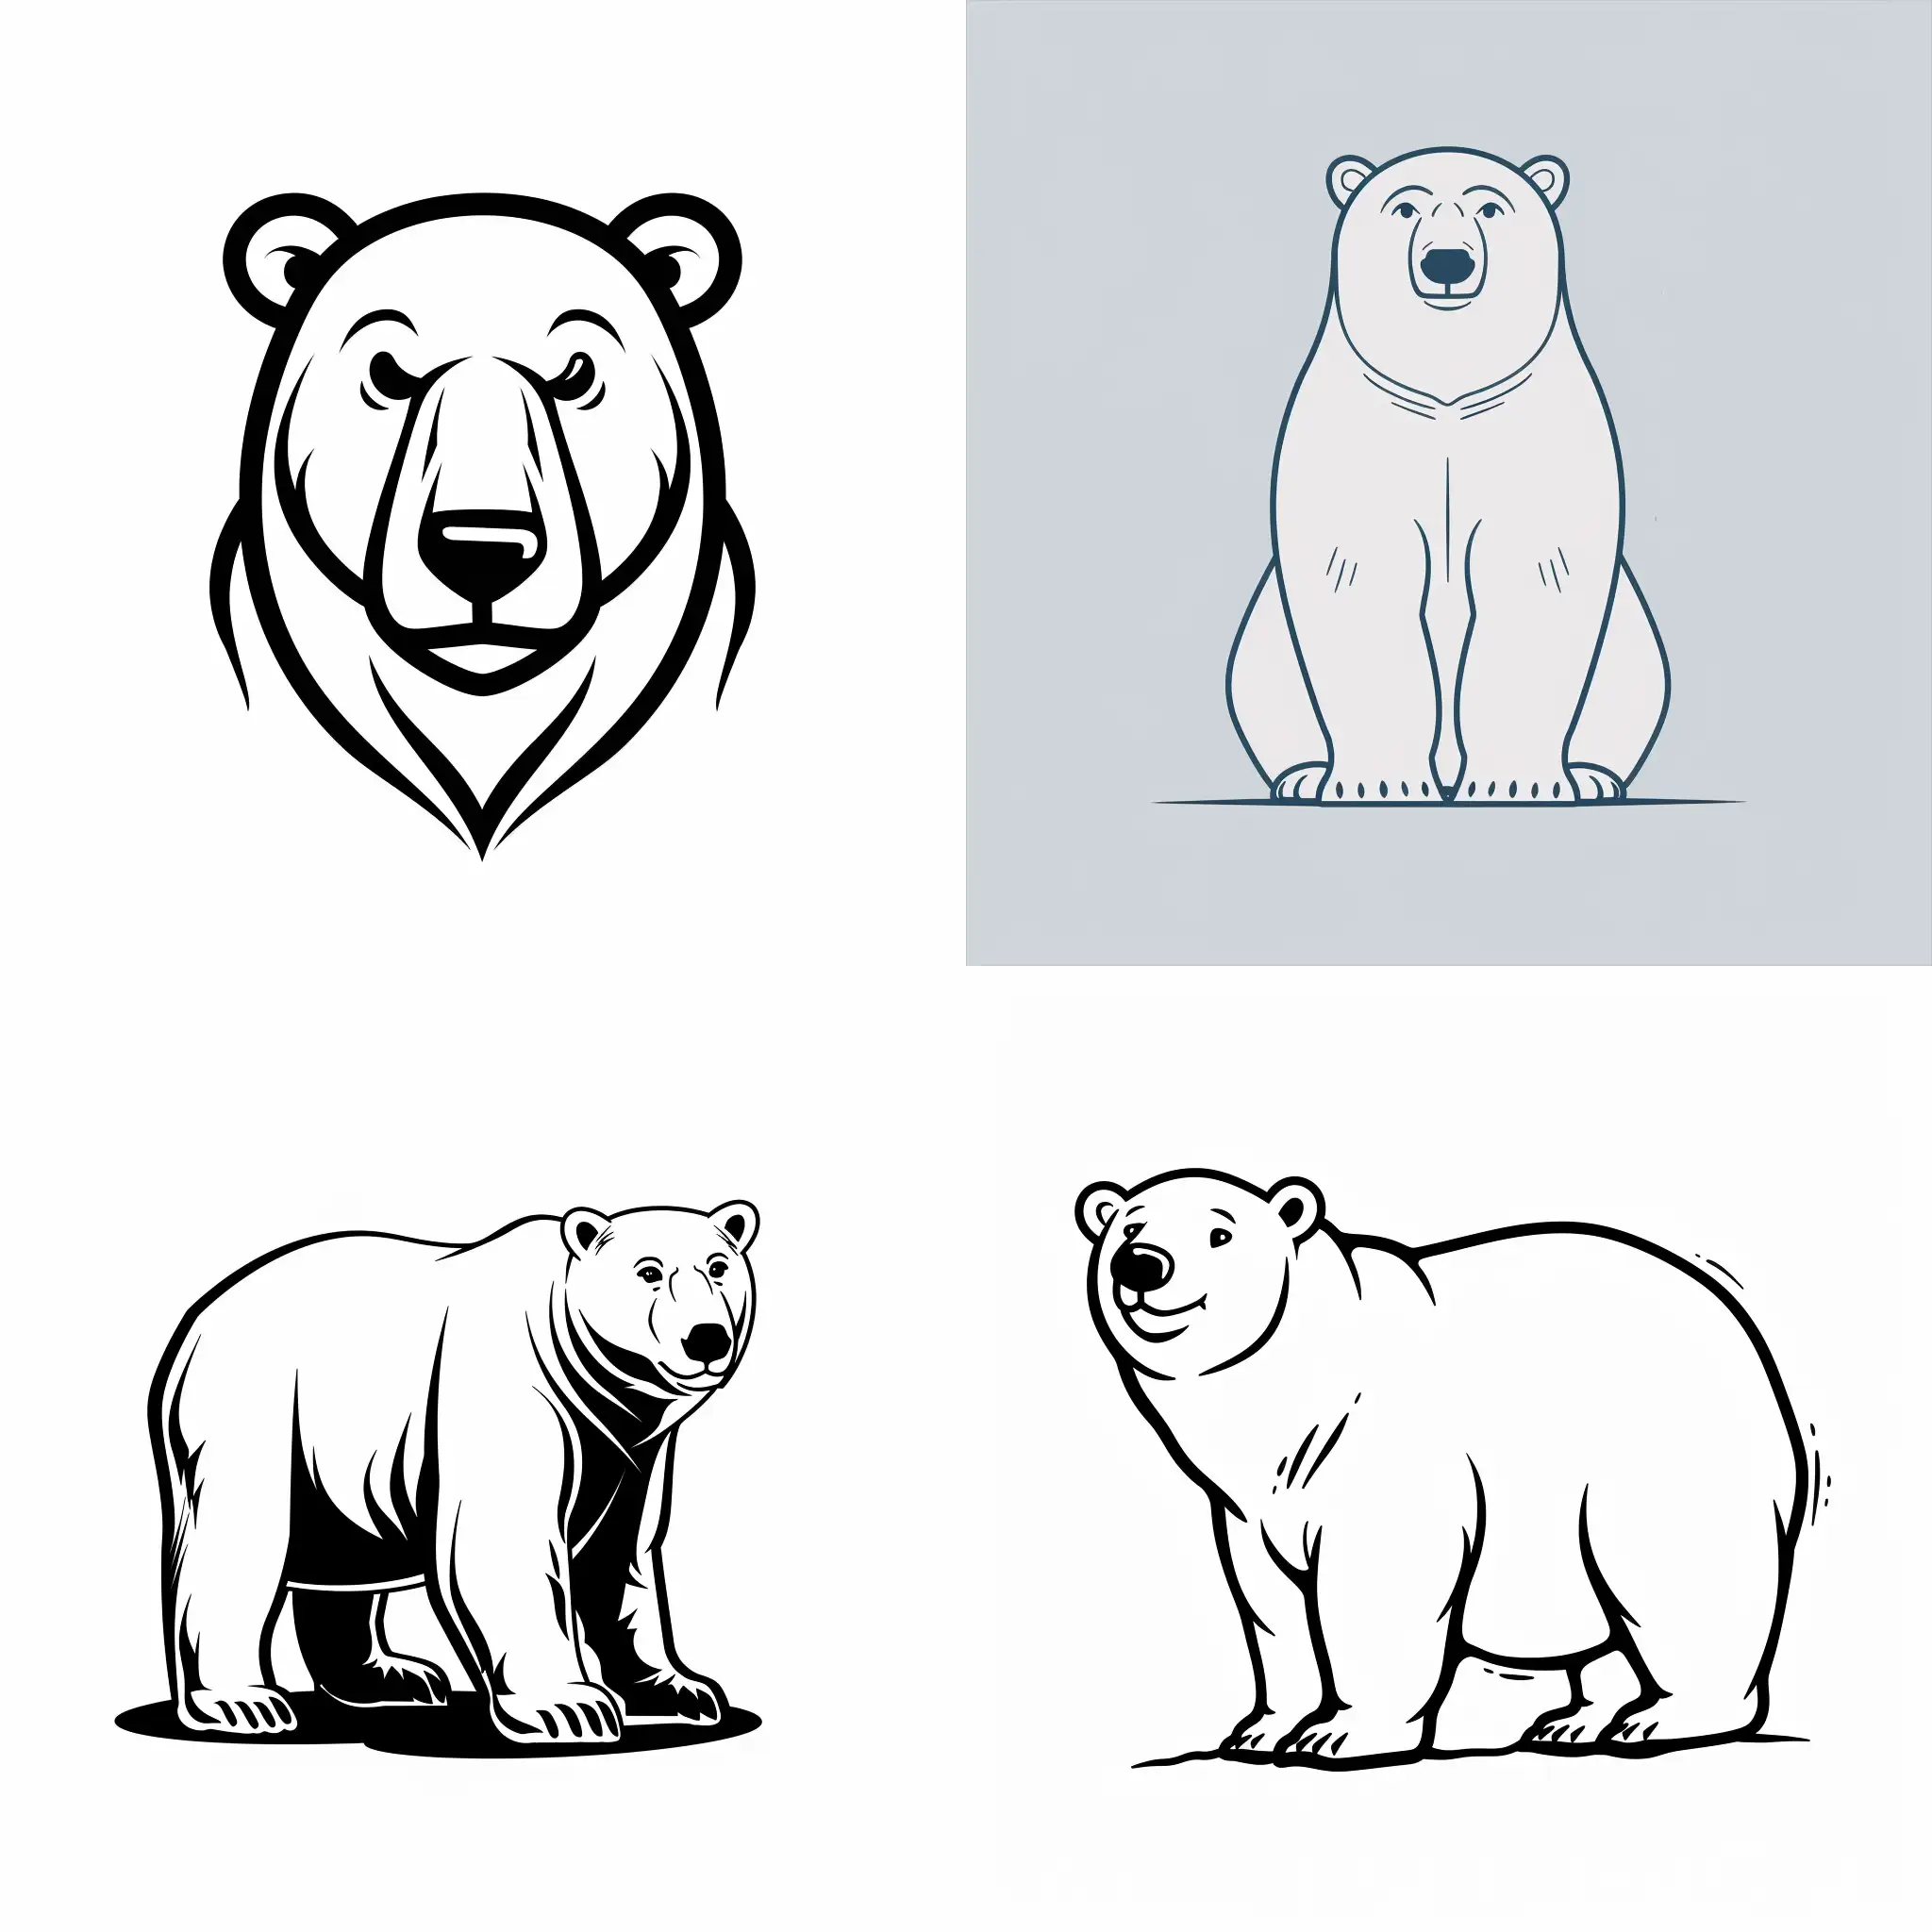 Minimalist-Line-Art-of-a-Unique-Polar-Bear-Mascot-from-Another-Planet